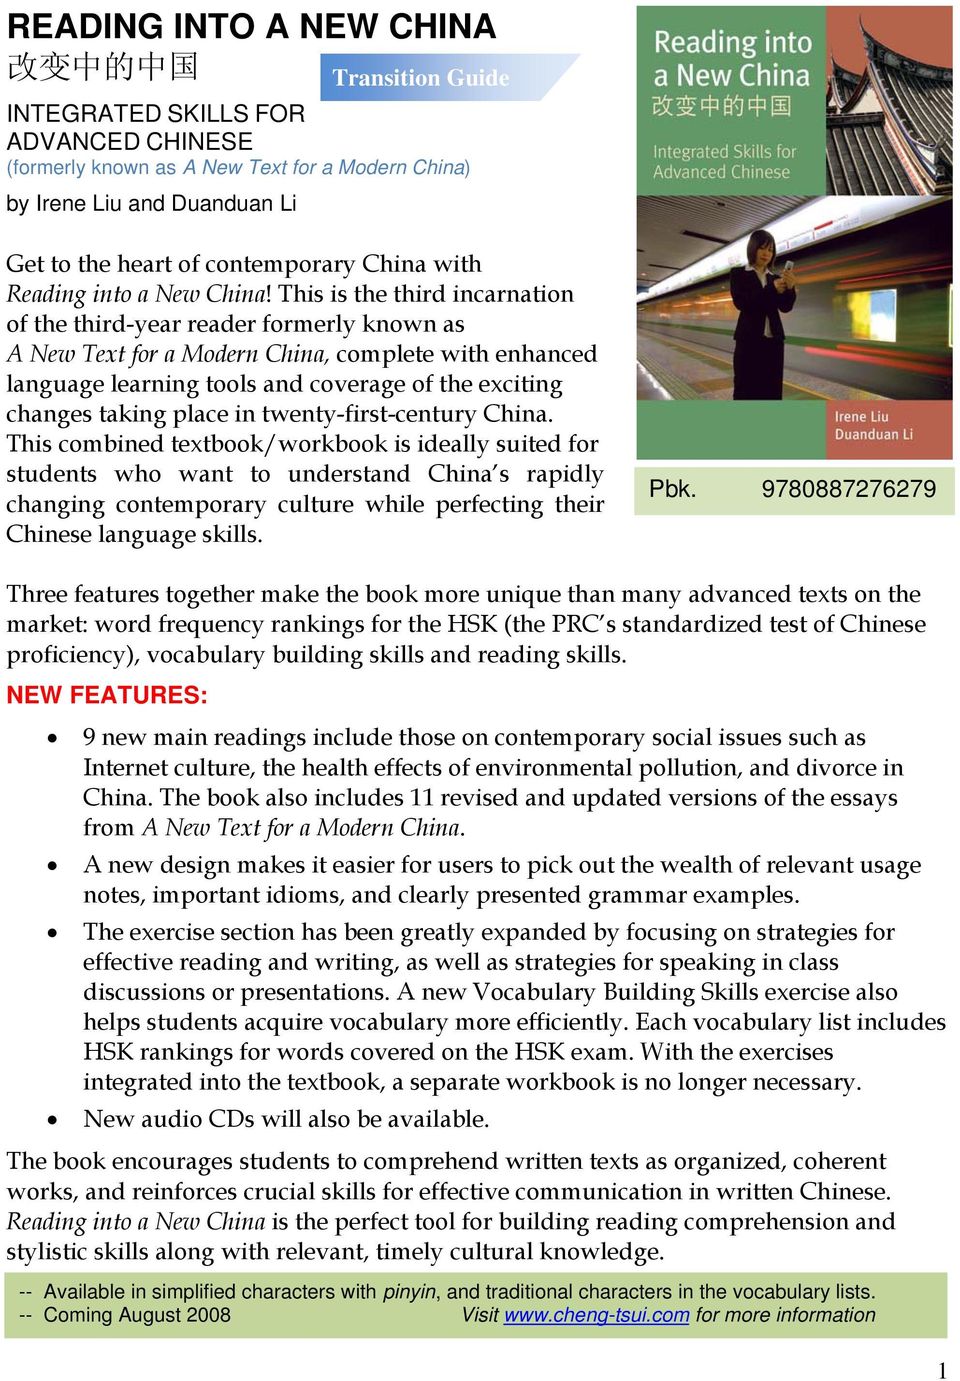 This is the third incarnation of the third-year reader formerly known as A New Text for a Modern China, complete with enhanced language learning tools and coverage of the exciting changes taking